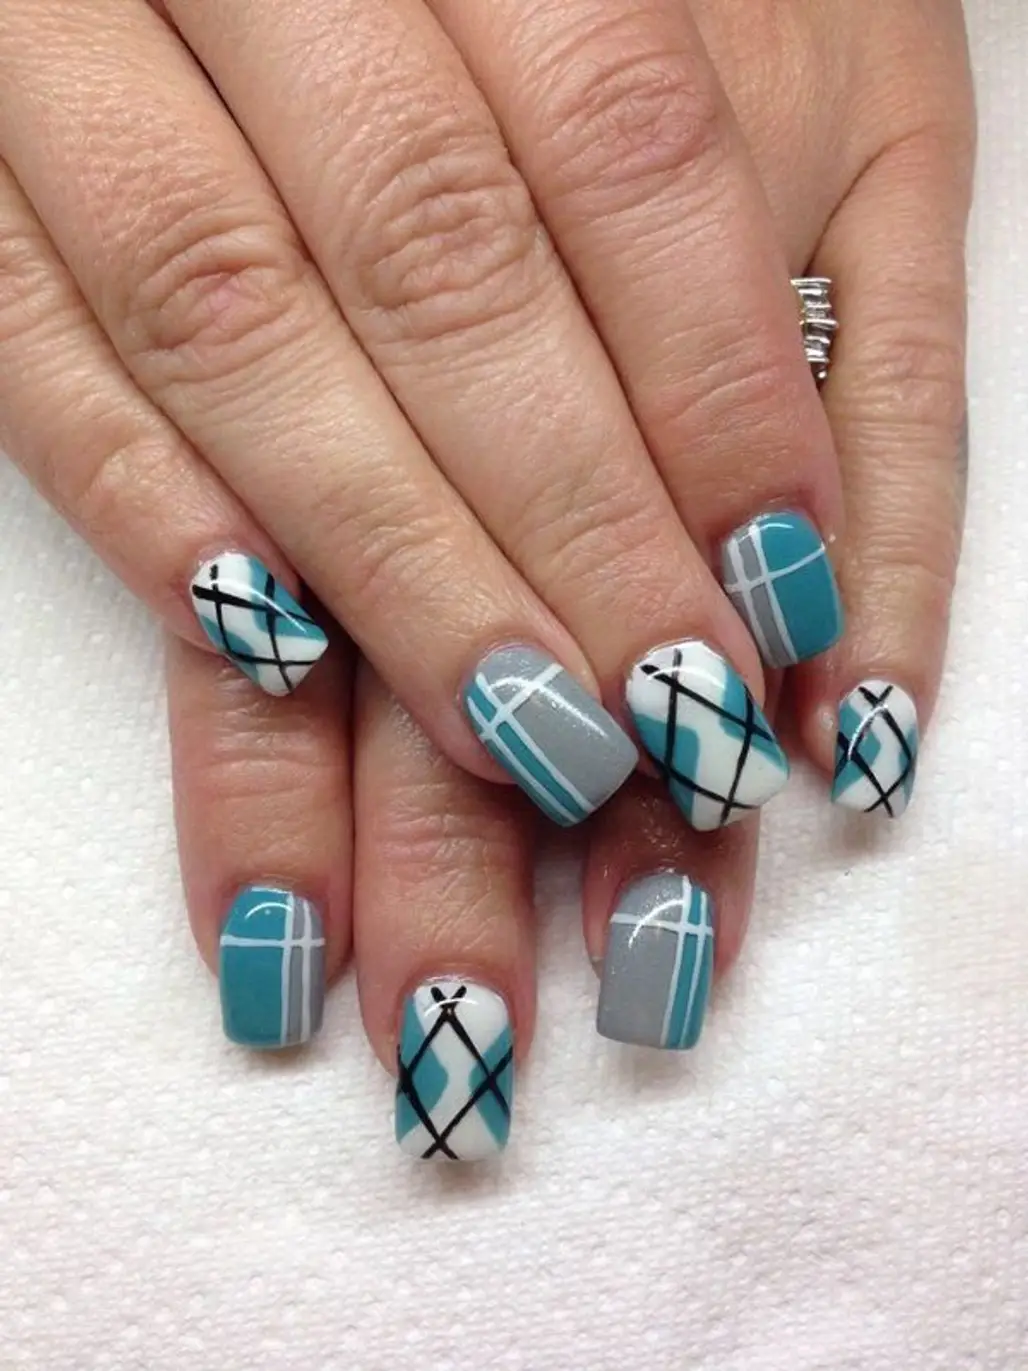 nail,finger,nail care,blue,manicure,